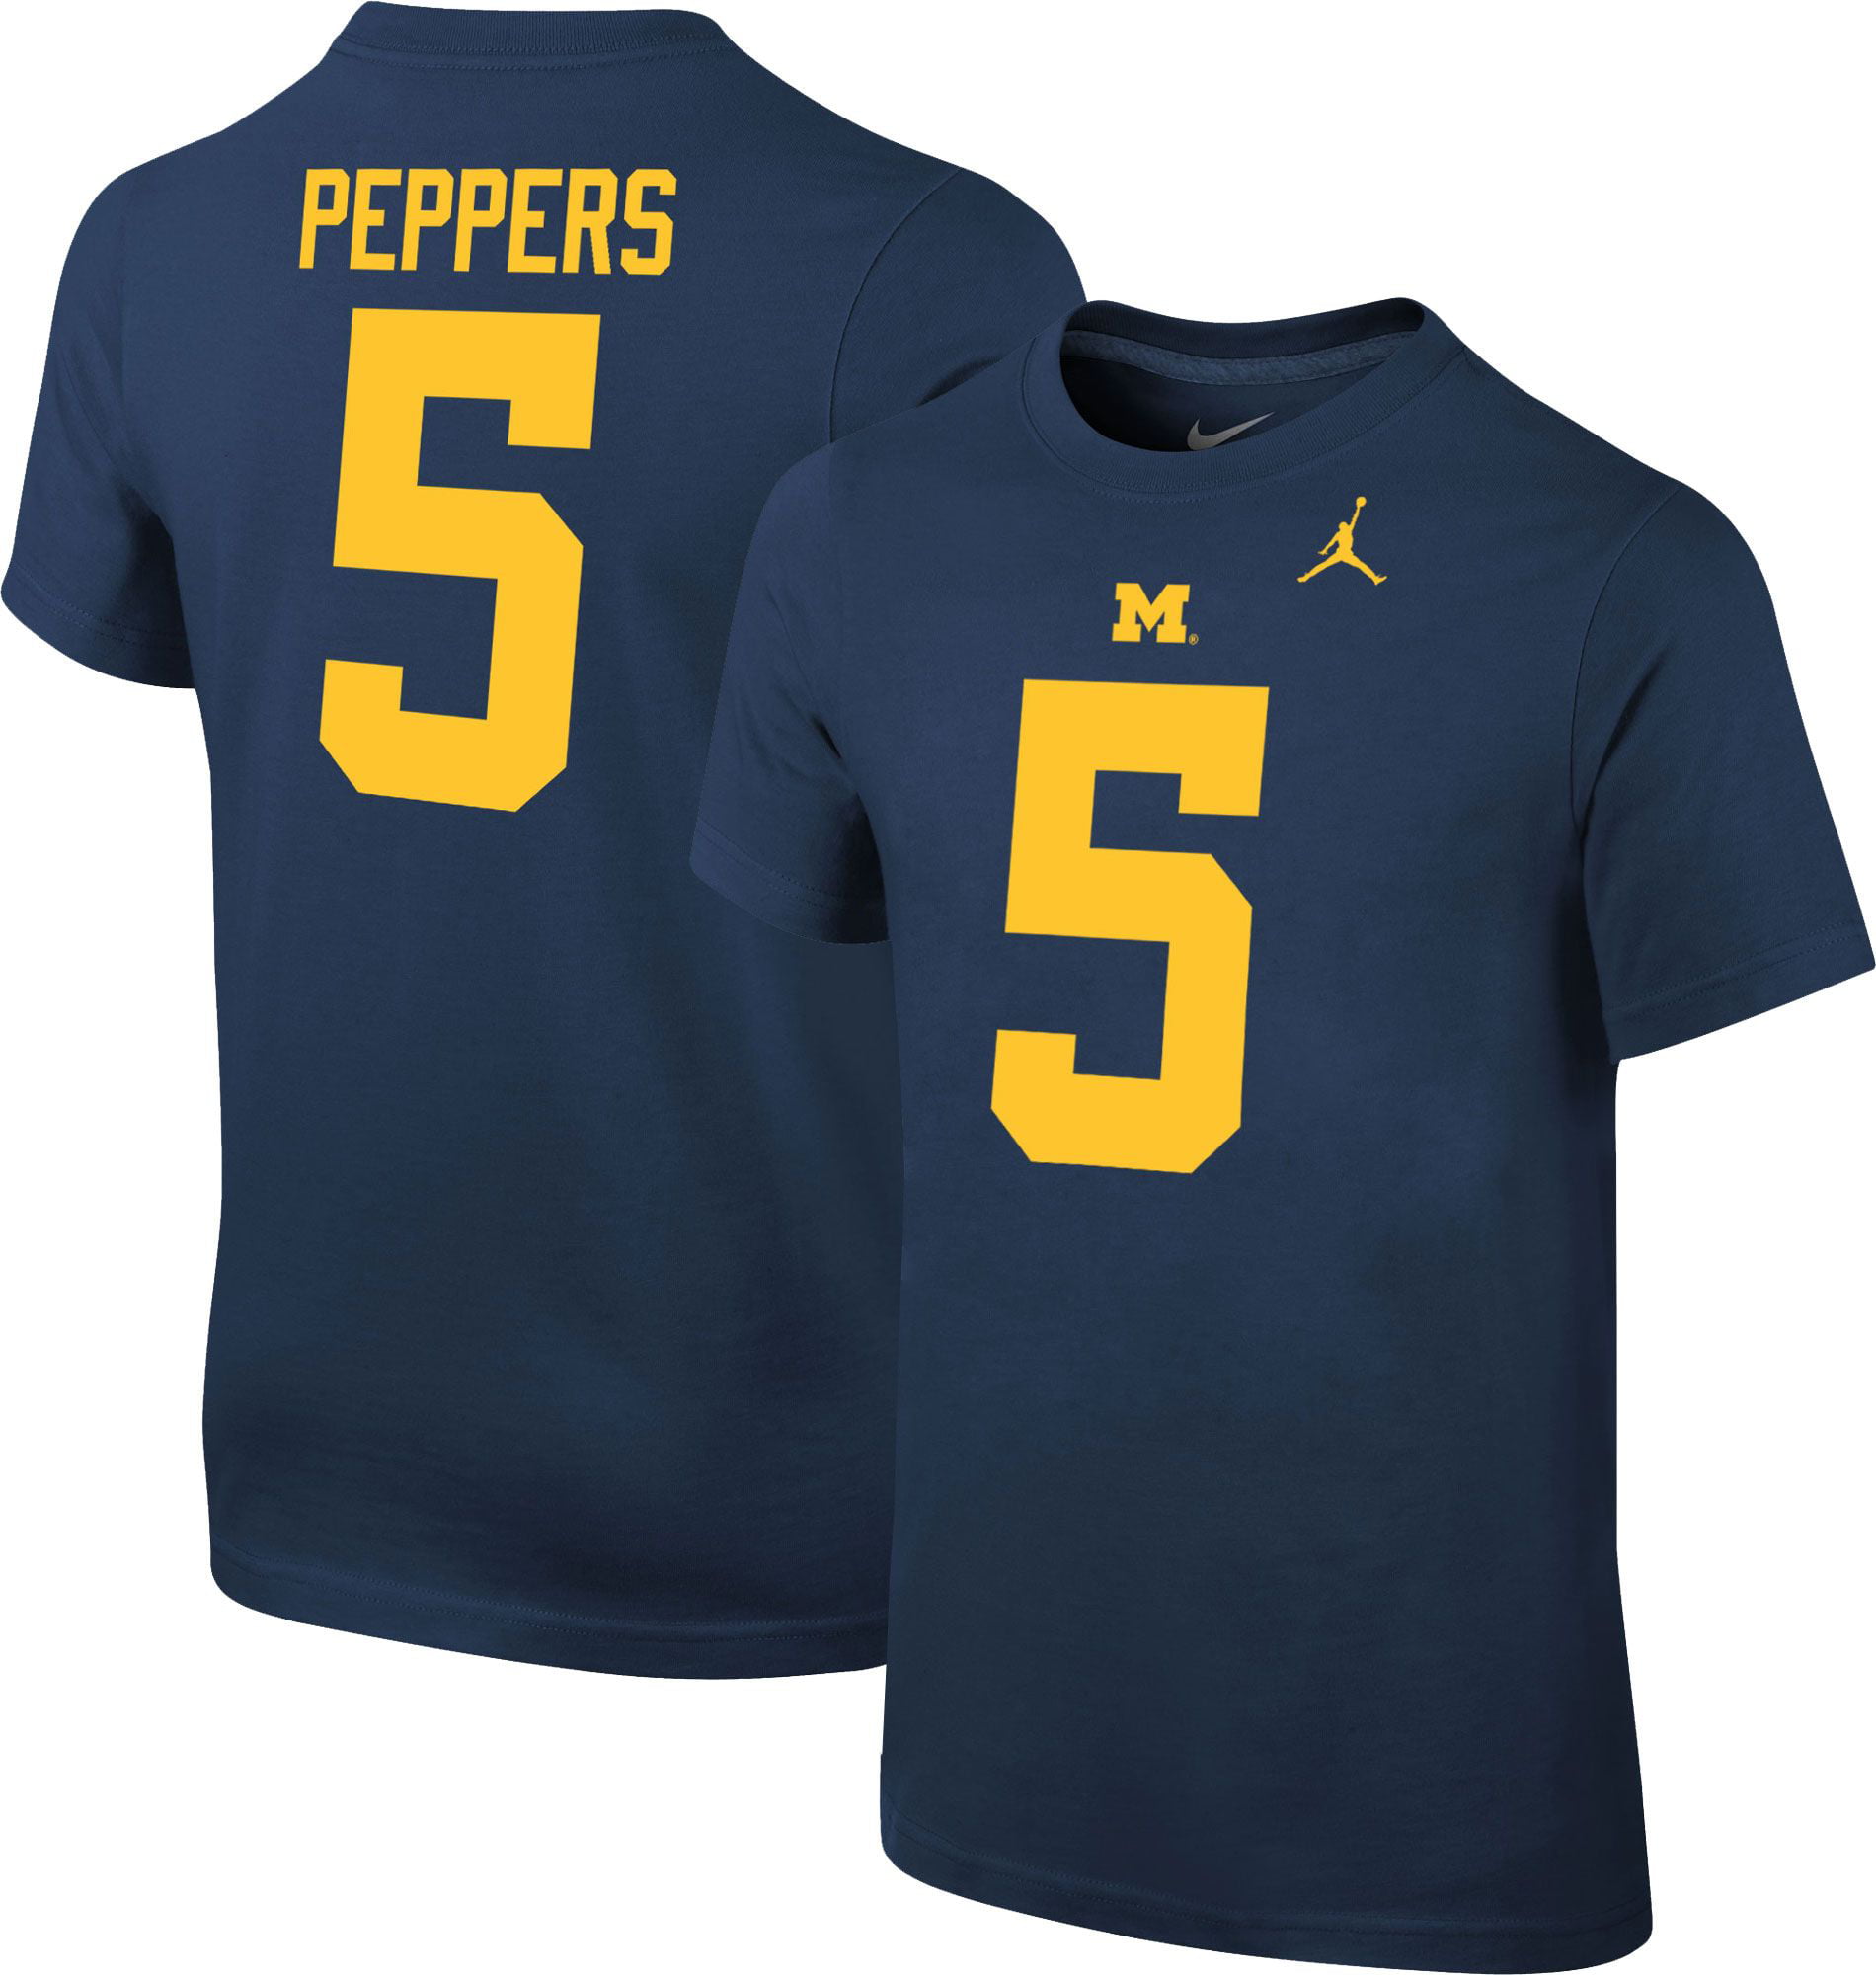 peppers michigan jersey